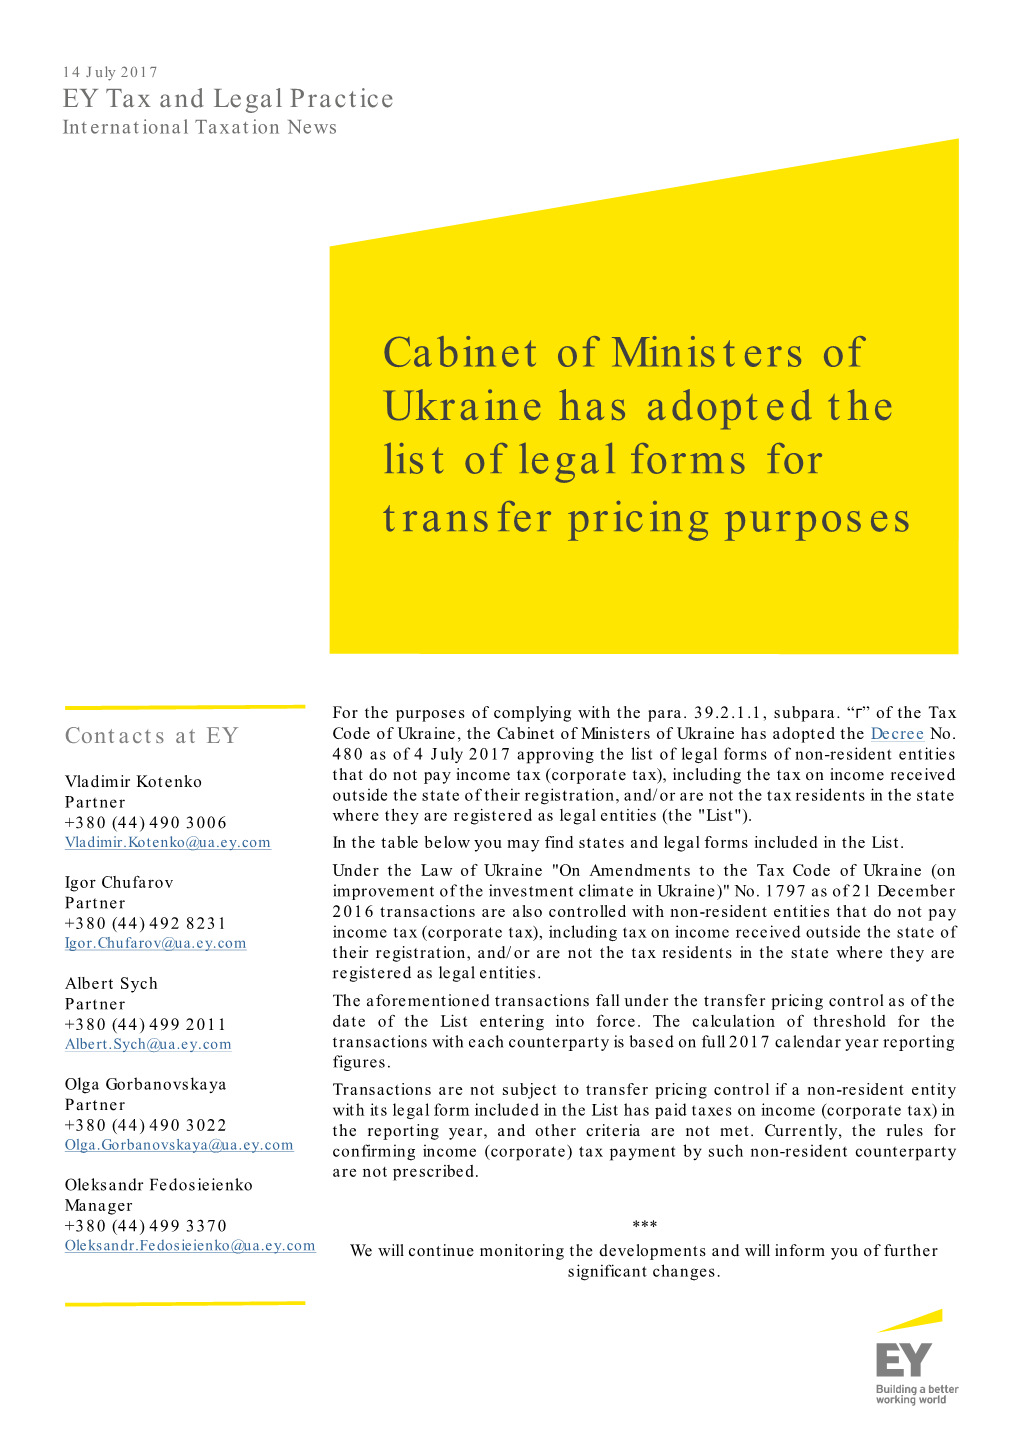 cabinet-of-ministers-of-ukraine-has-adopted-the-list-of-legal-forms-for